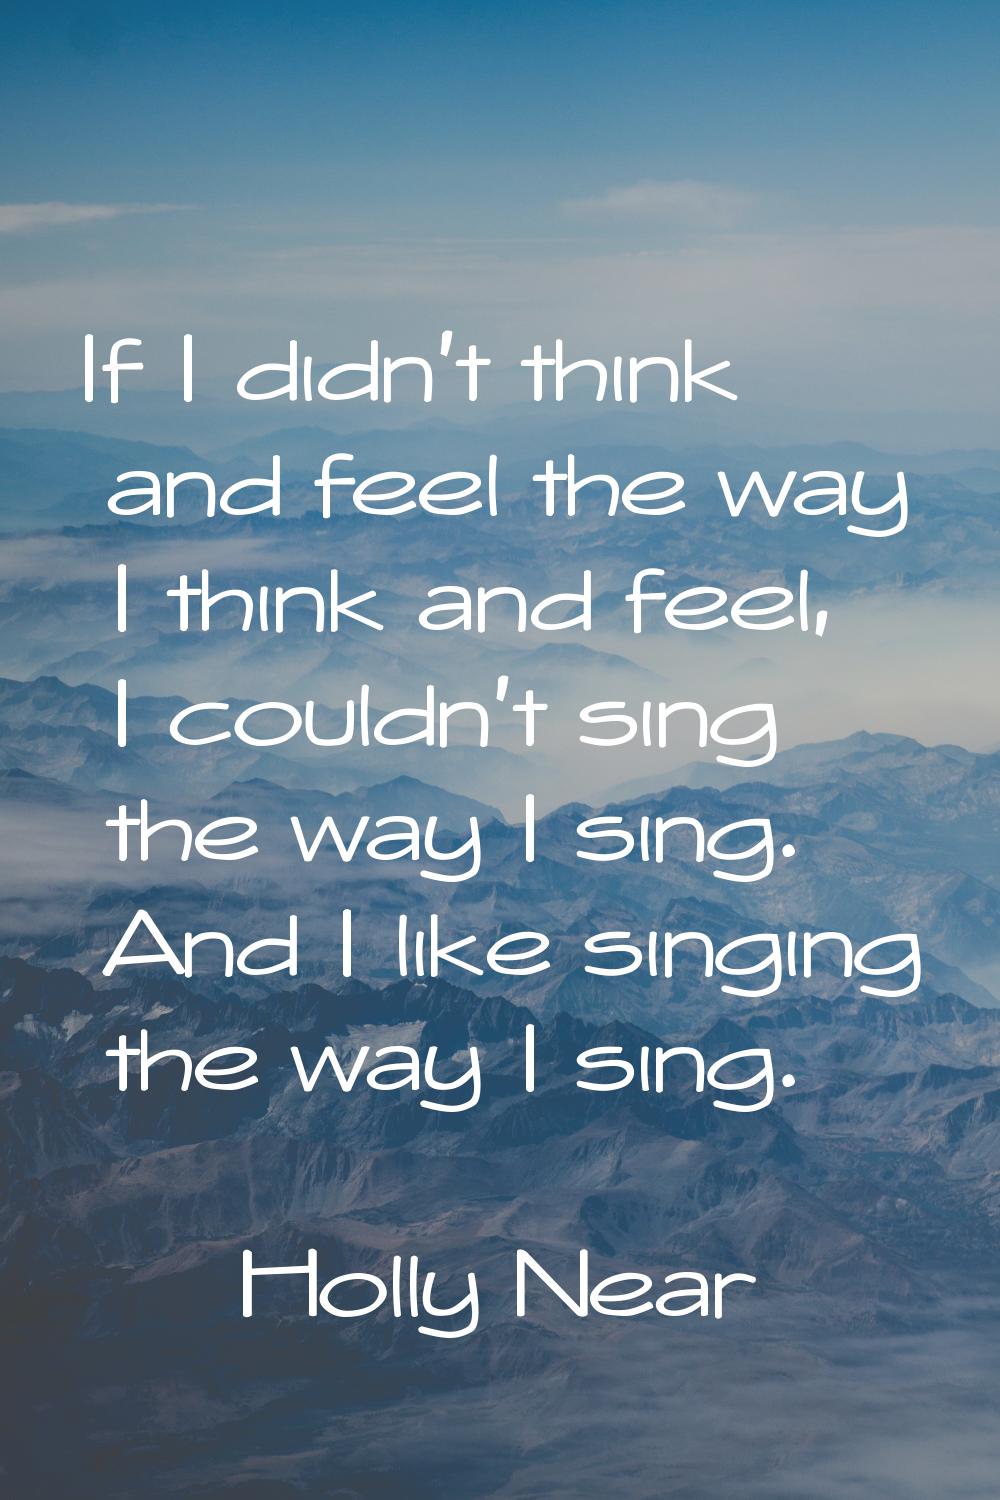 If I didn't think and feel the way I think and feel, I couldn't sing the way I sing. And I like sin